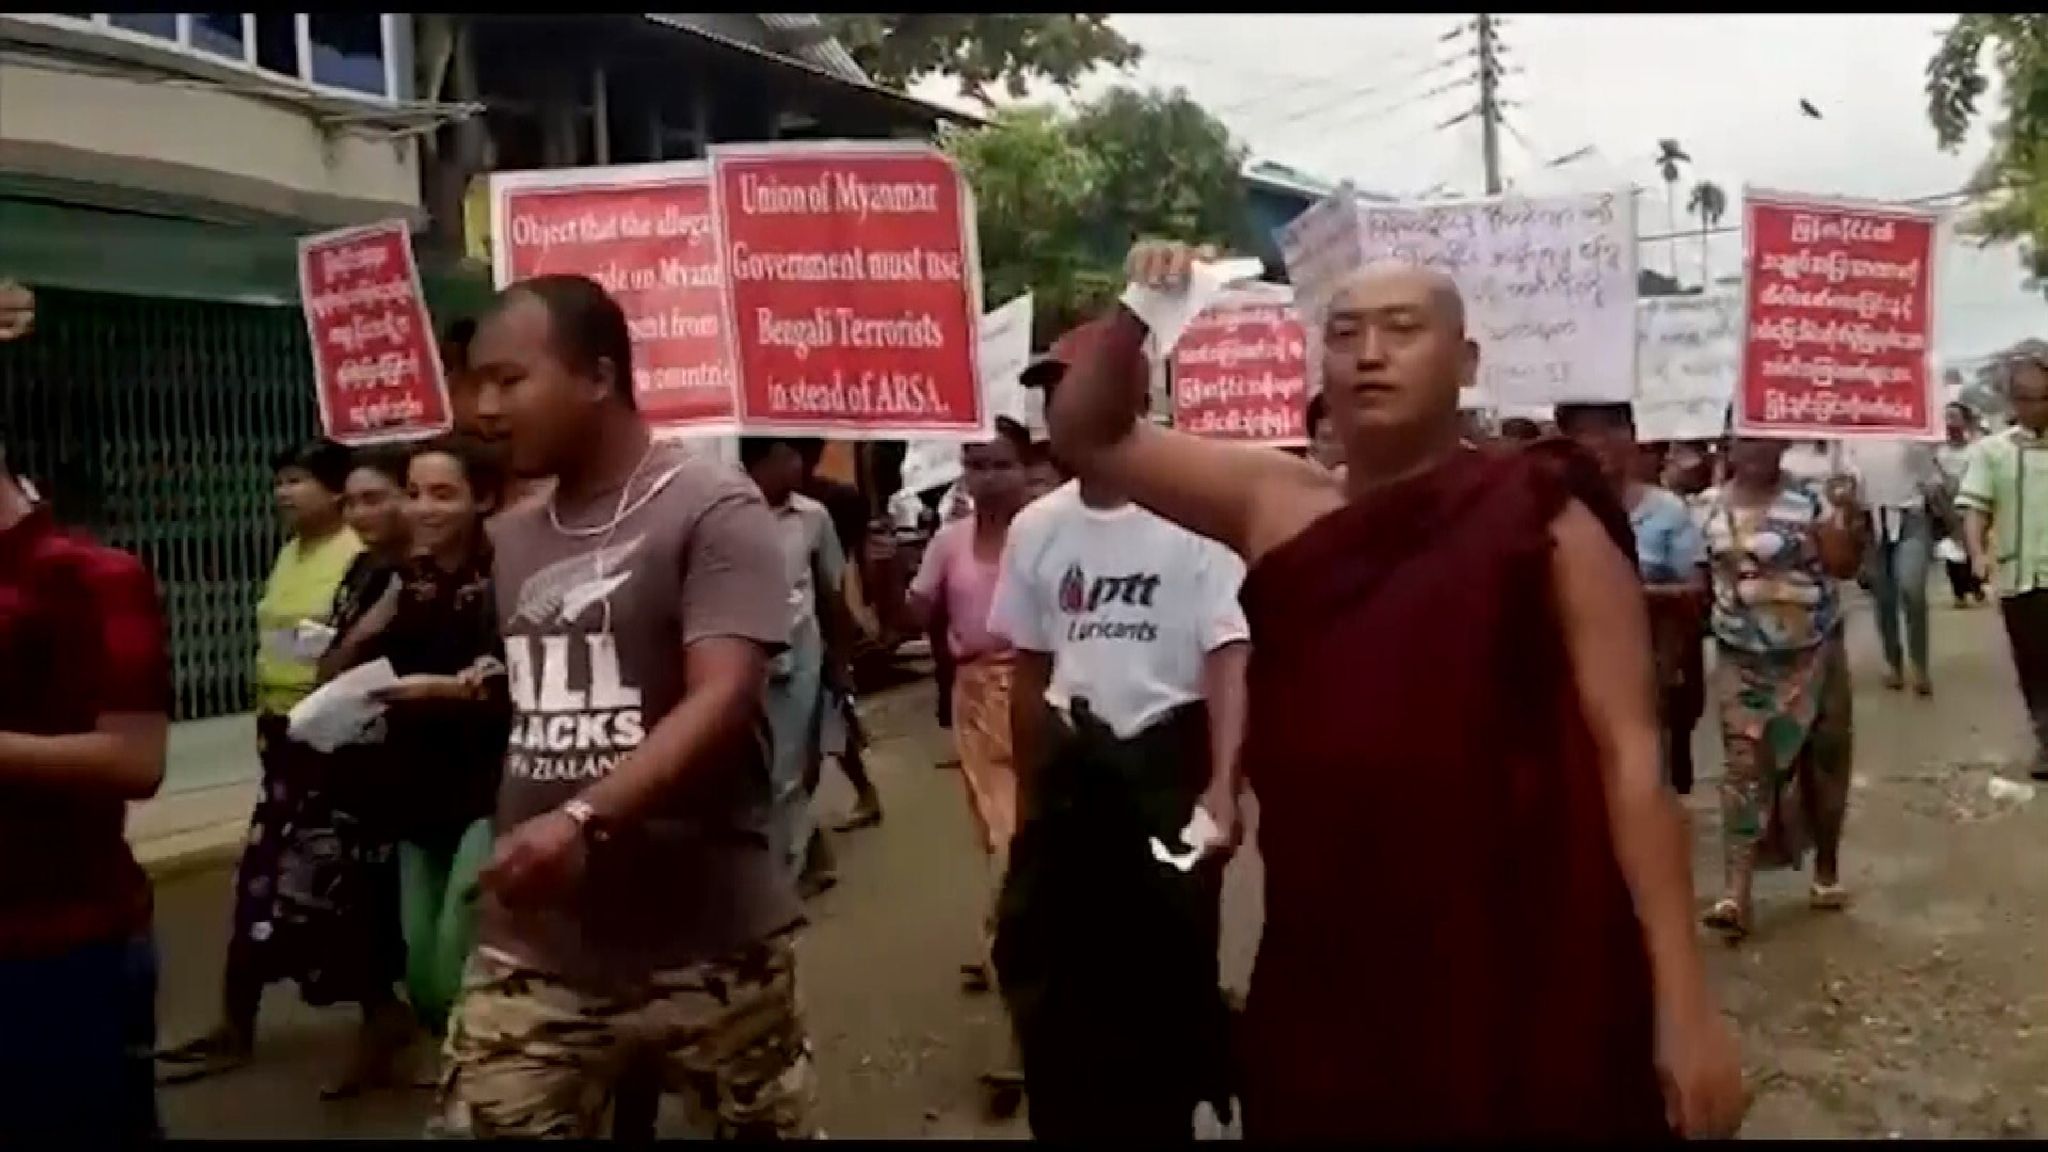 Hundreds Of Buddhists In Myanmar Protest Against Rohingya Return